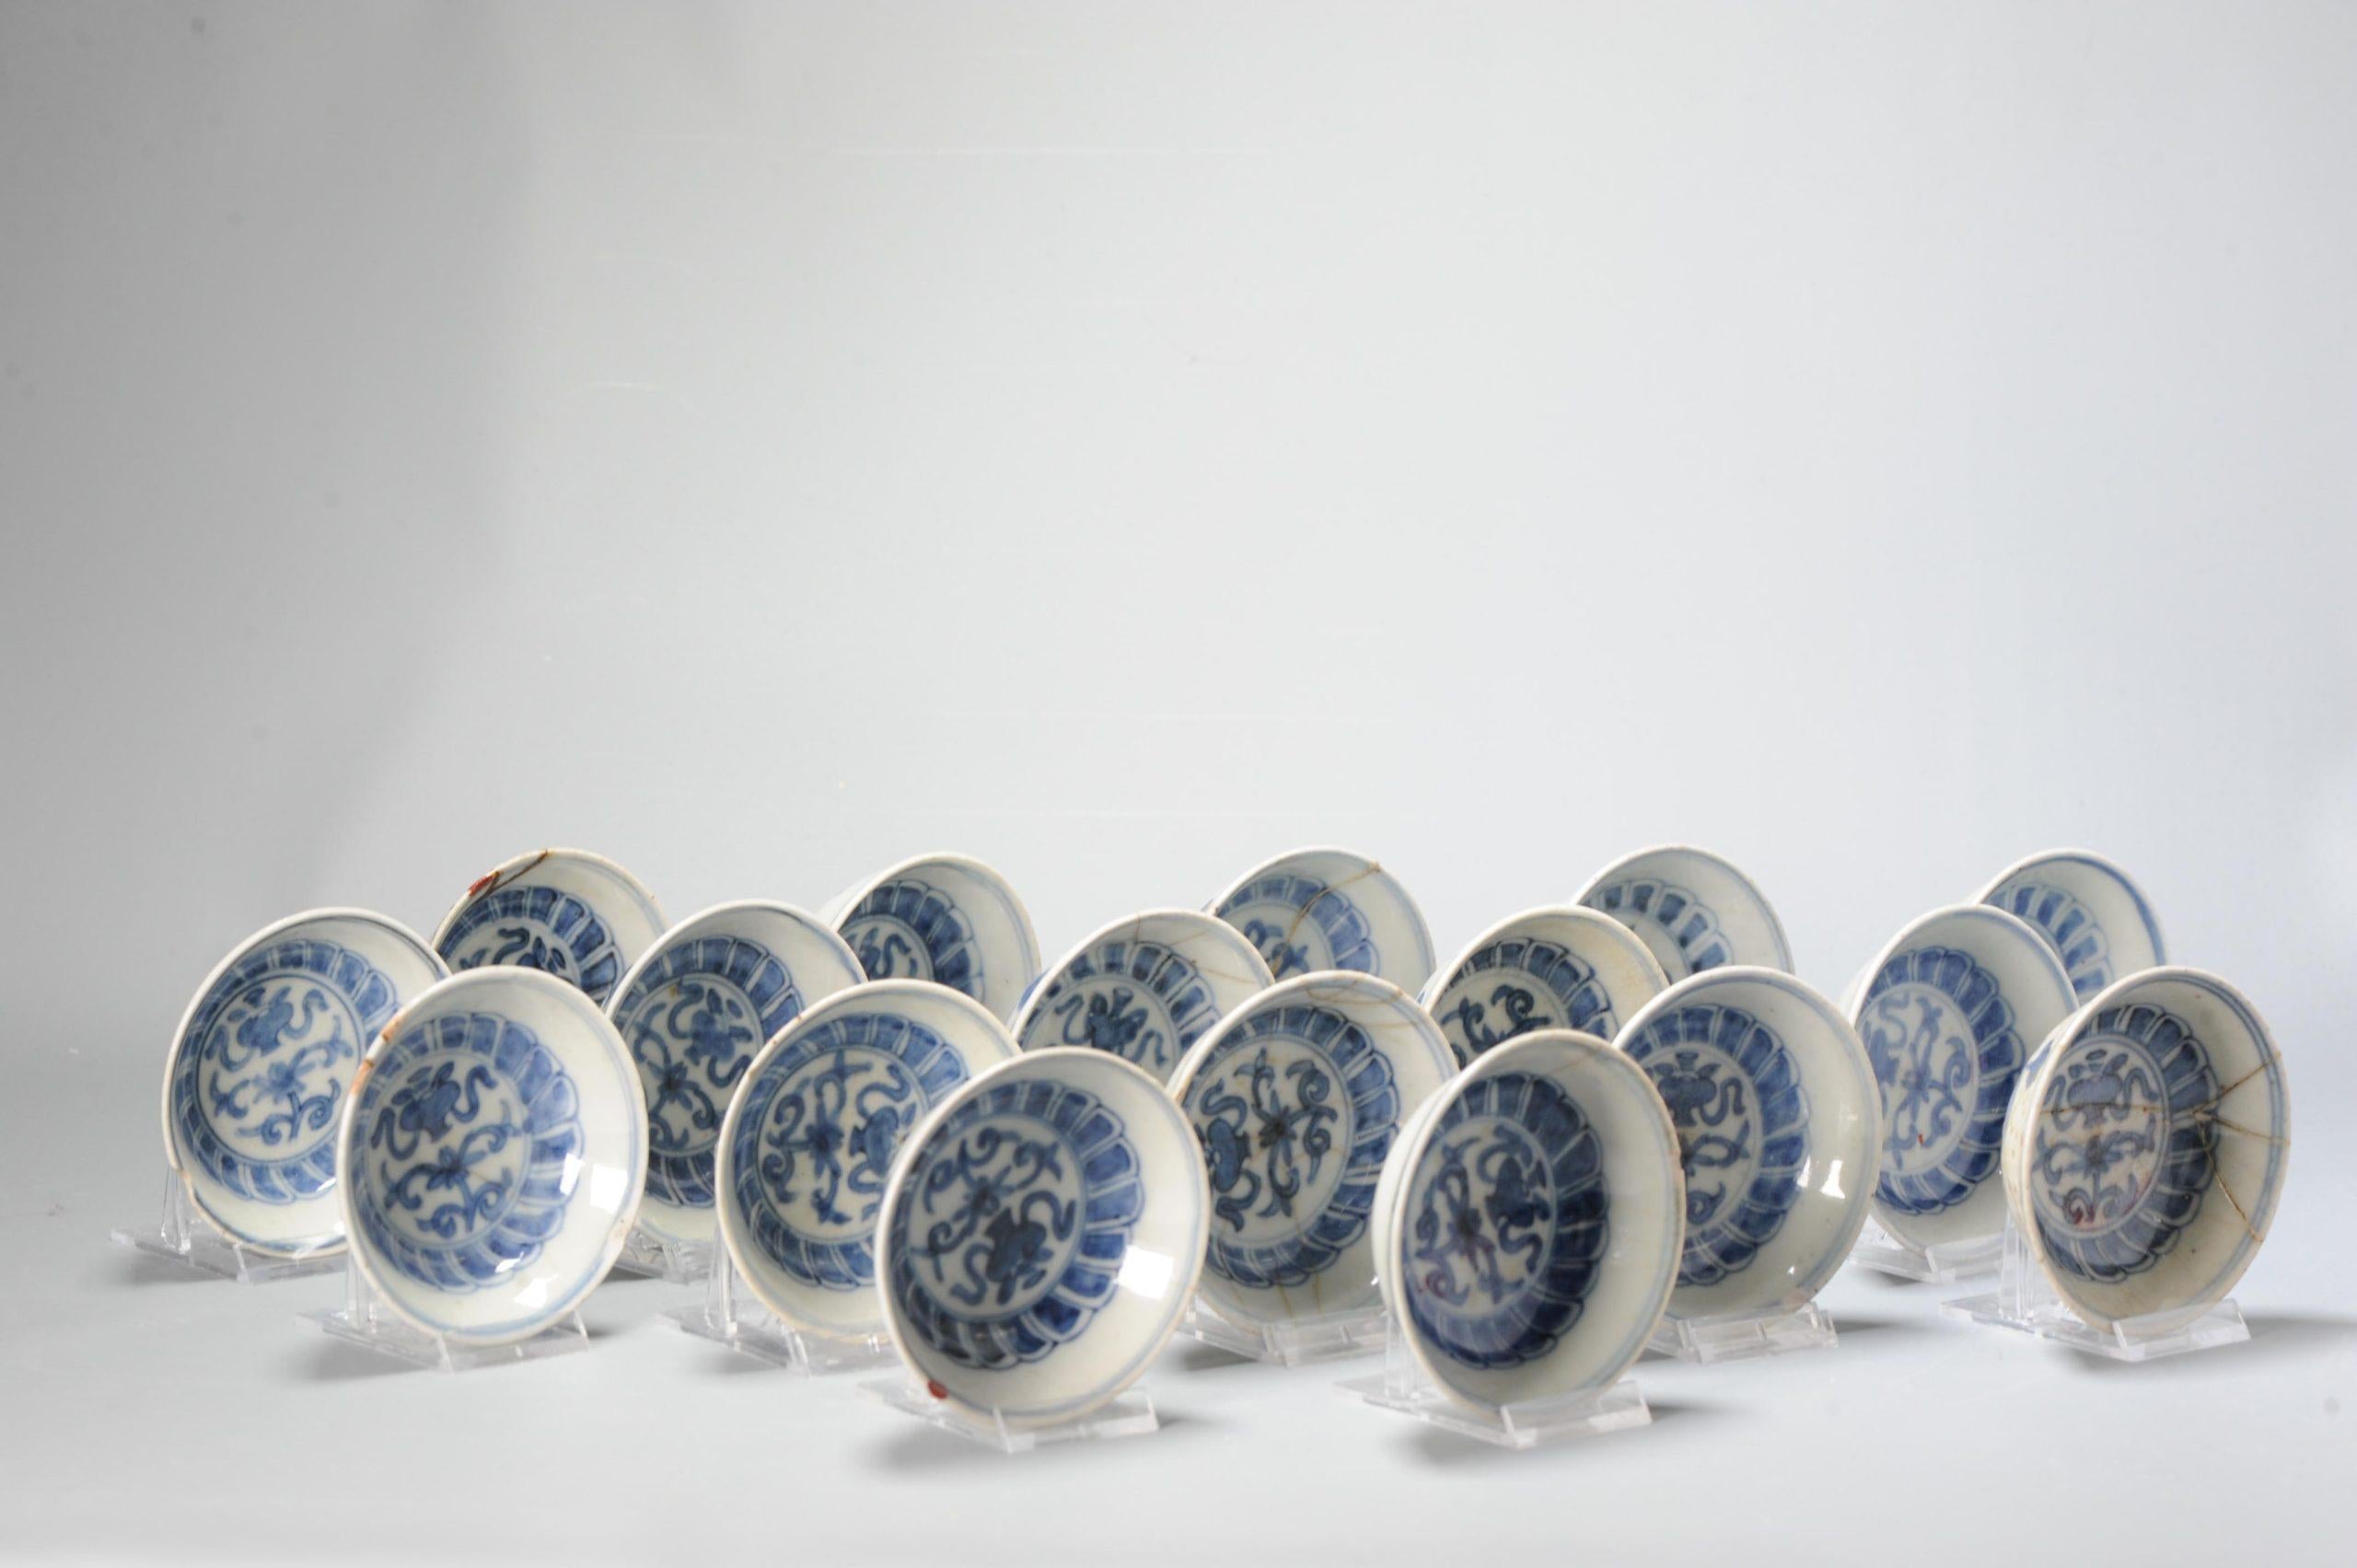 A large set of Small Ming Porcelain Dishes in the Japanese Taste, Late Ming Period, Tianqi or Early Chongzhen c.1620 – 1630. These small Transitional porcelain dishe were made in China at Jingdezhen to a design supplied by the Japanese. Small Ming